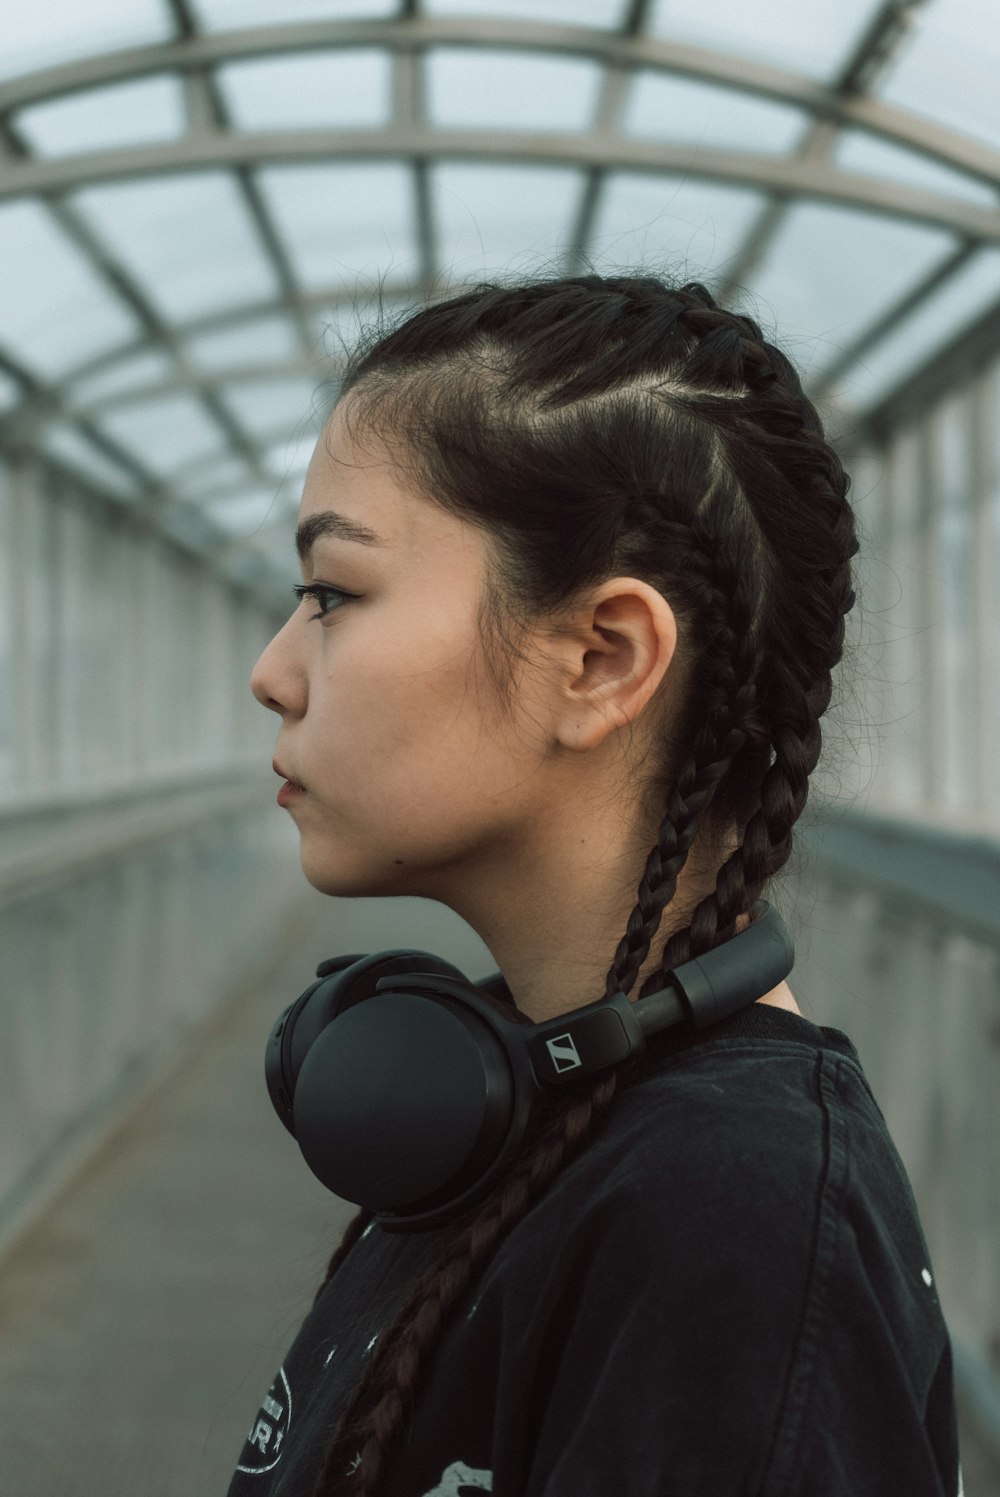 a young woman with braids wearing headphones